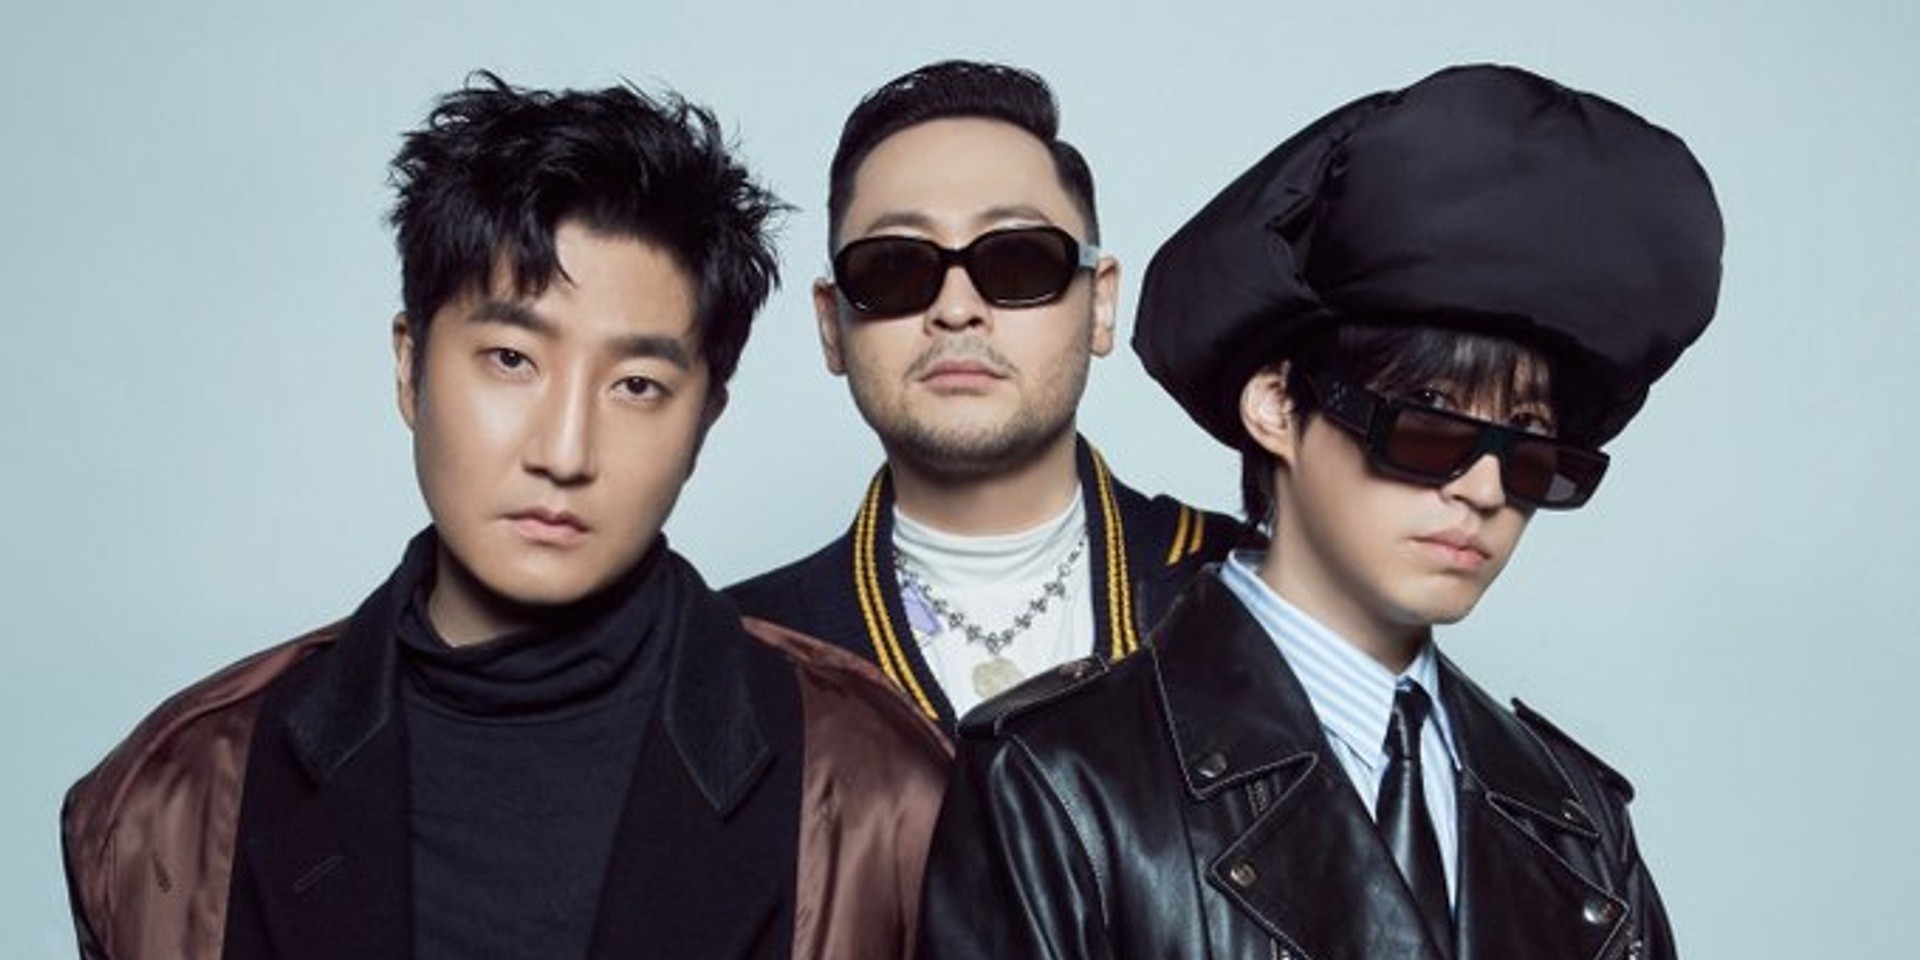 Epik High return with new single 'Face ID' featuring JUSTHIS, GIRIBOY, and SIK-K – watch